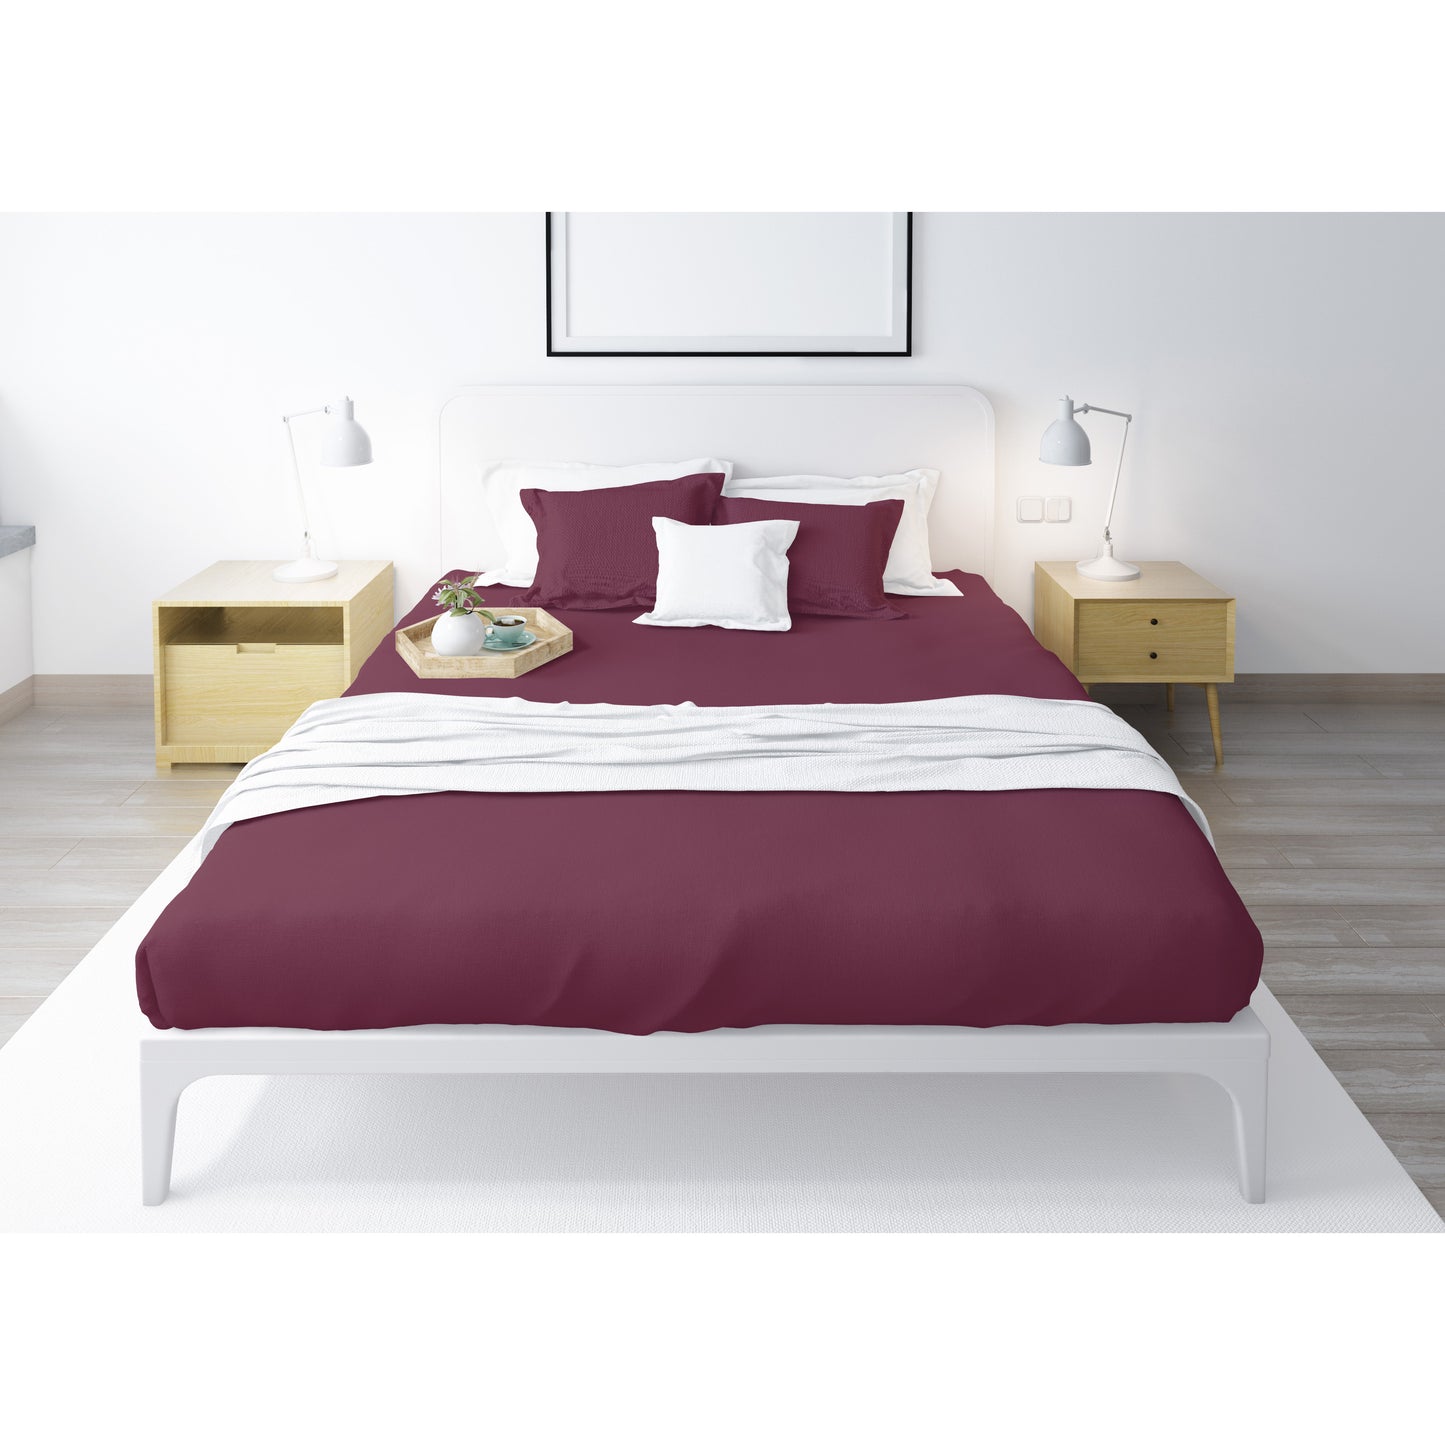 Burgundy fitted sheet set, 250tc percale cotton and 2 pillowcases - multiple sizes - BD326